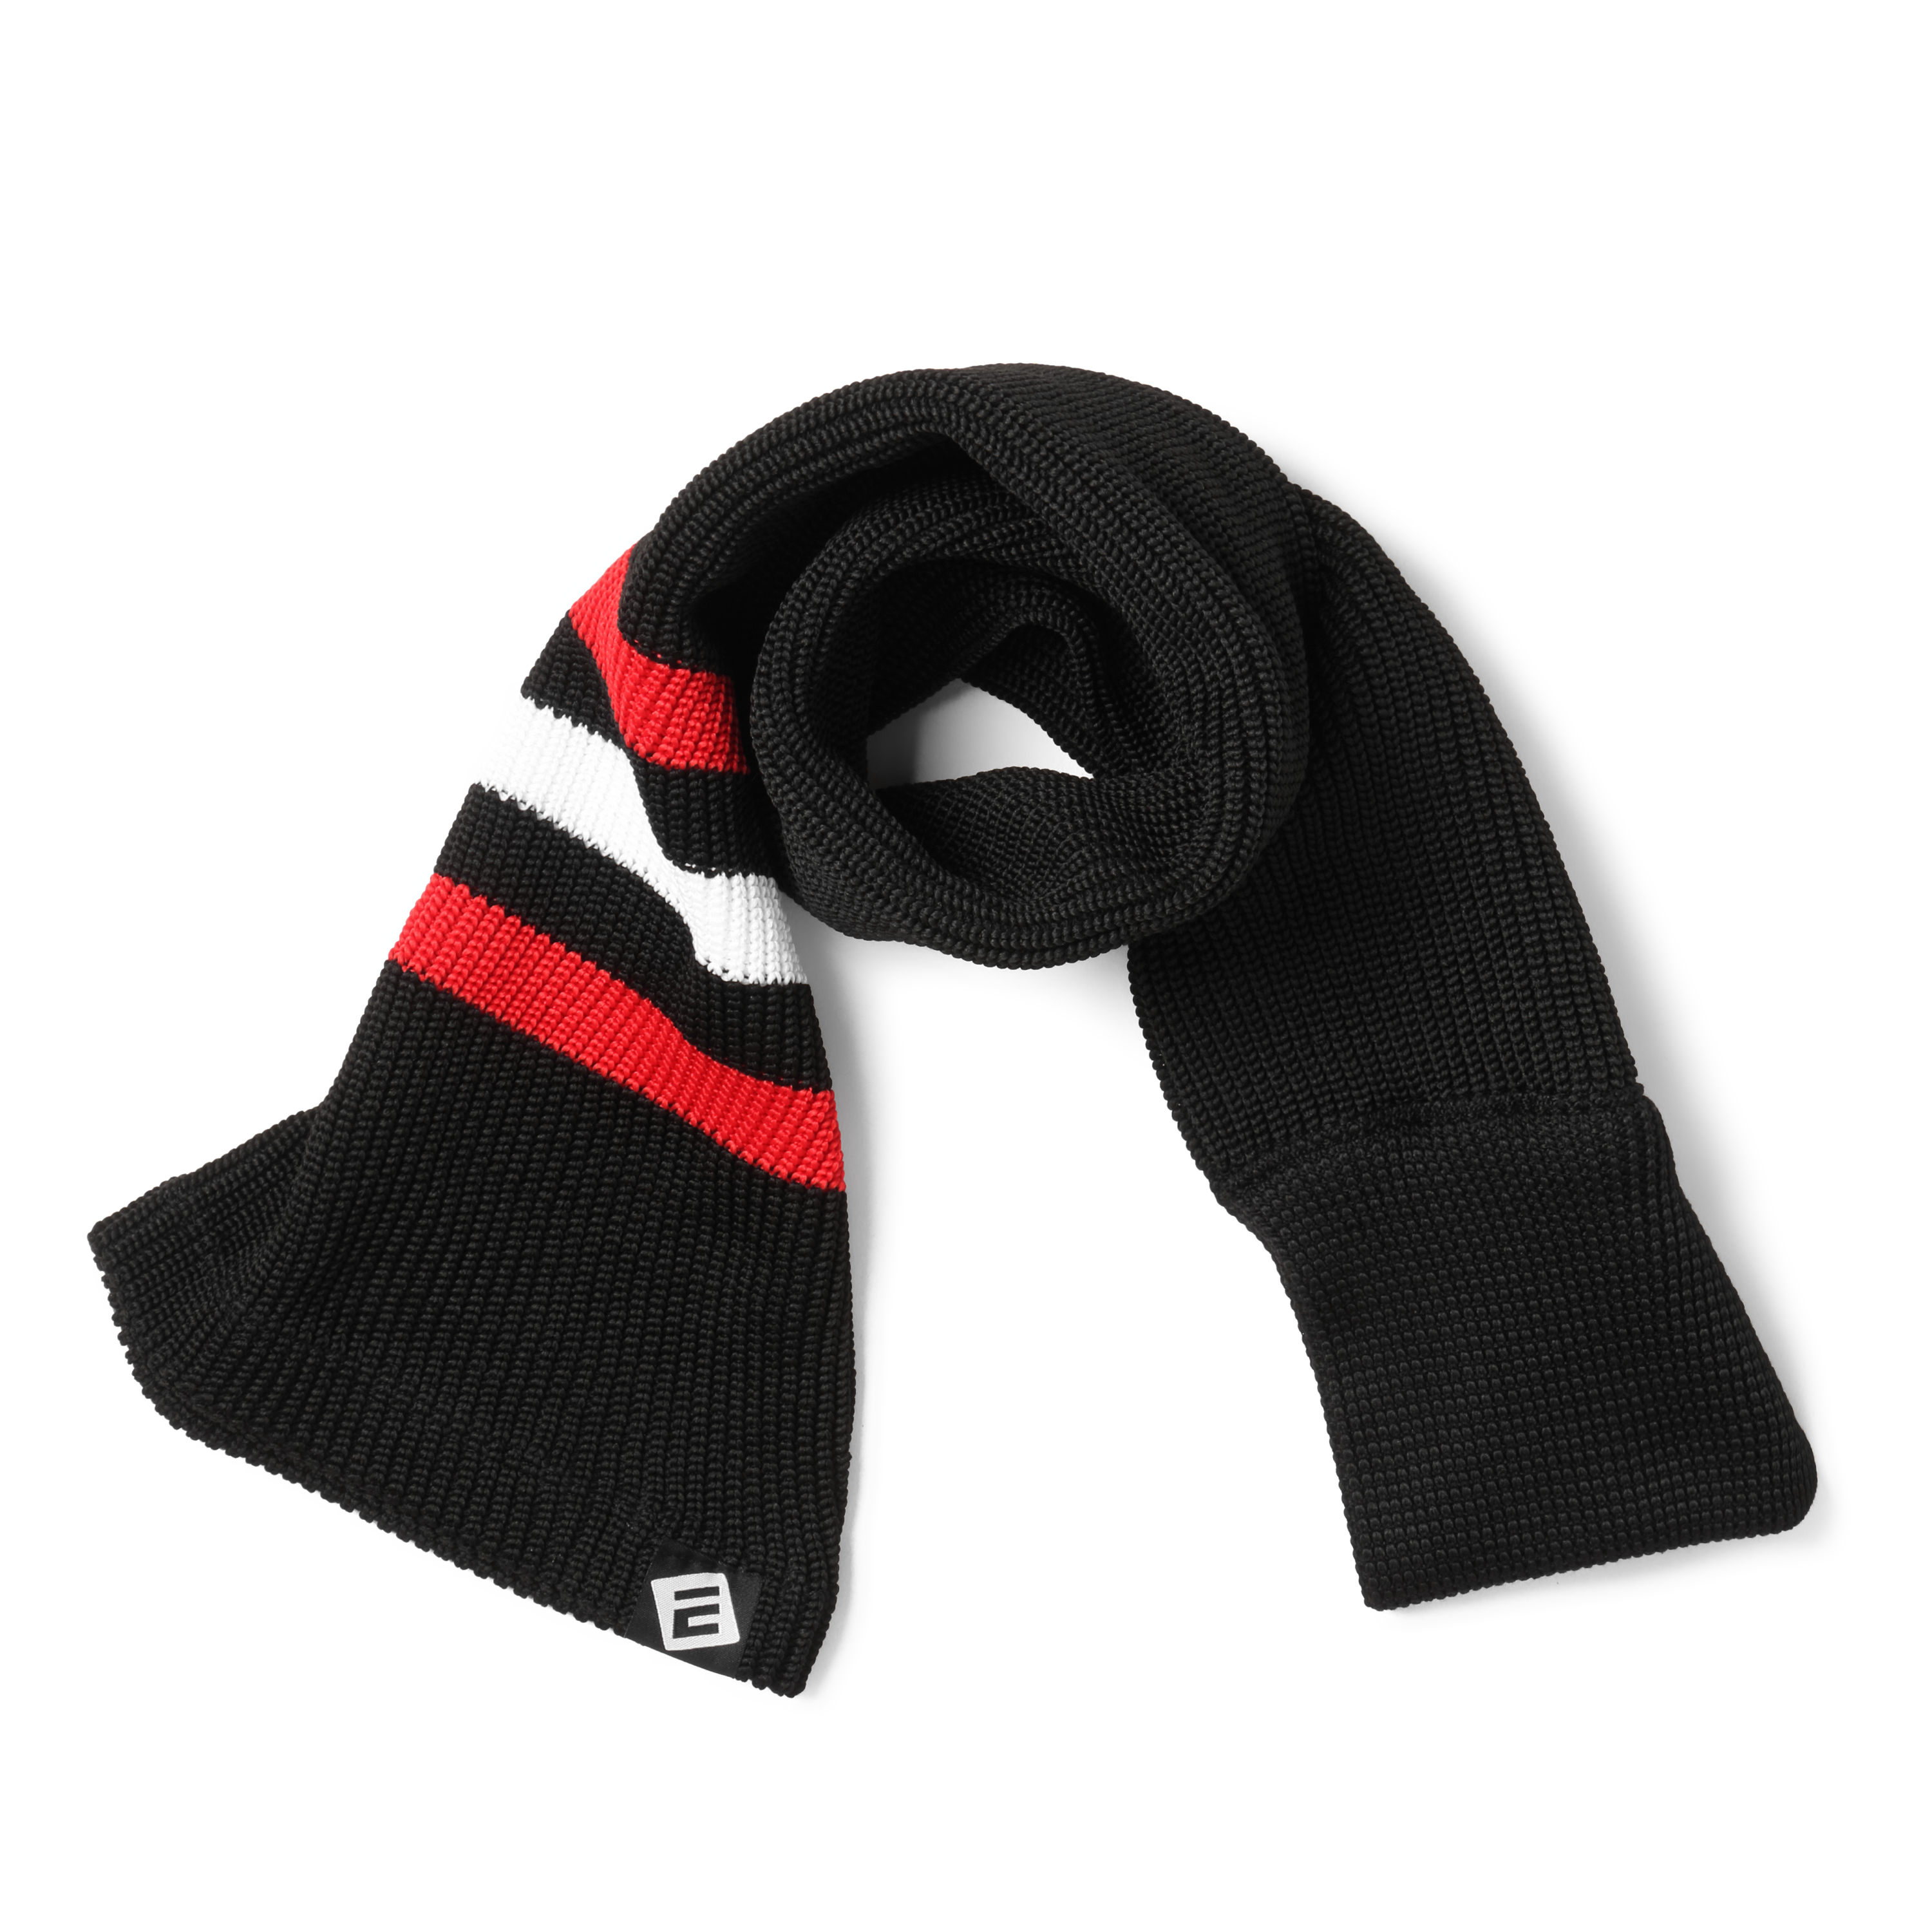 EALER HAS200 Series Men's Winter Knit Striped Cold-proof/Warm Scarf Unique  Design, Don't Have to Worry About How to Wear